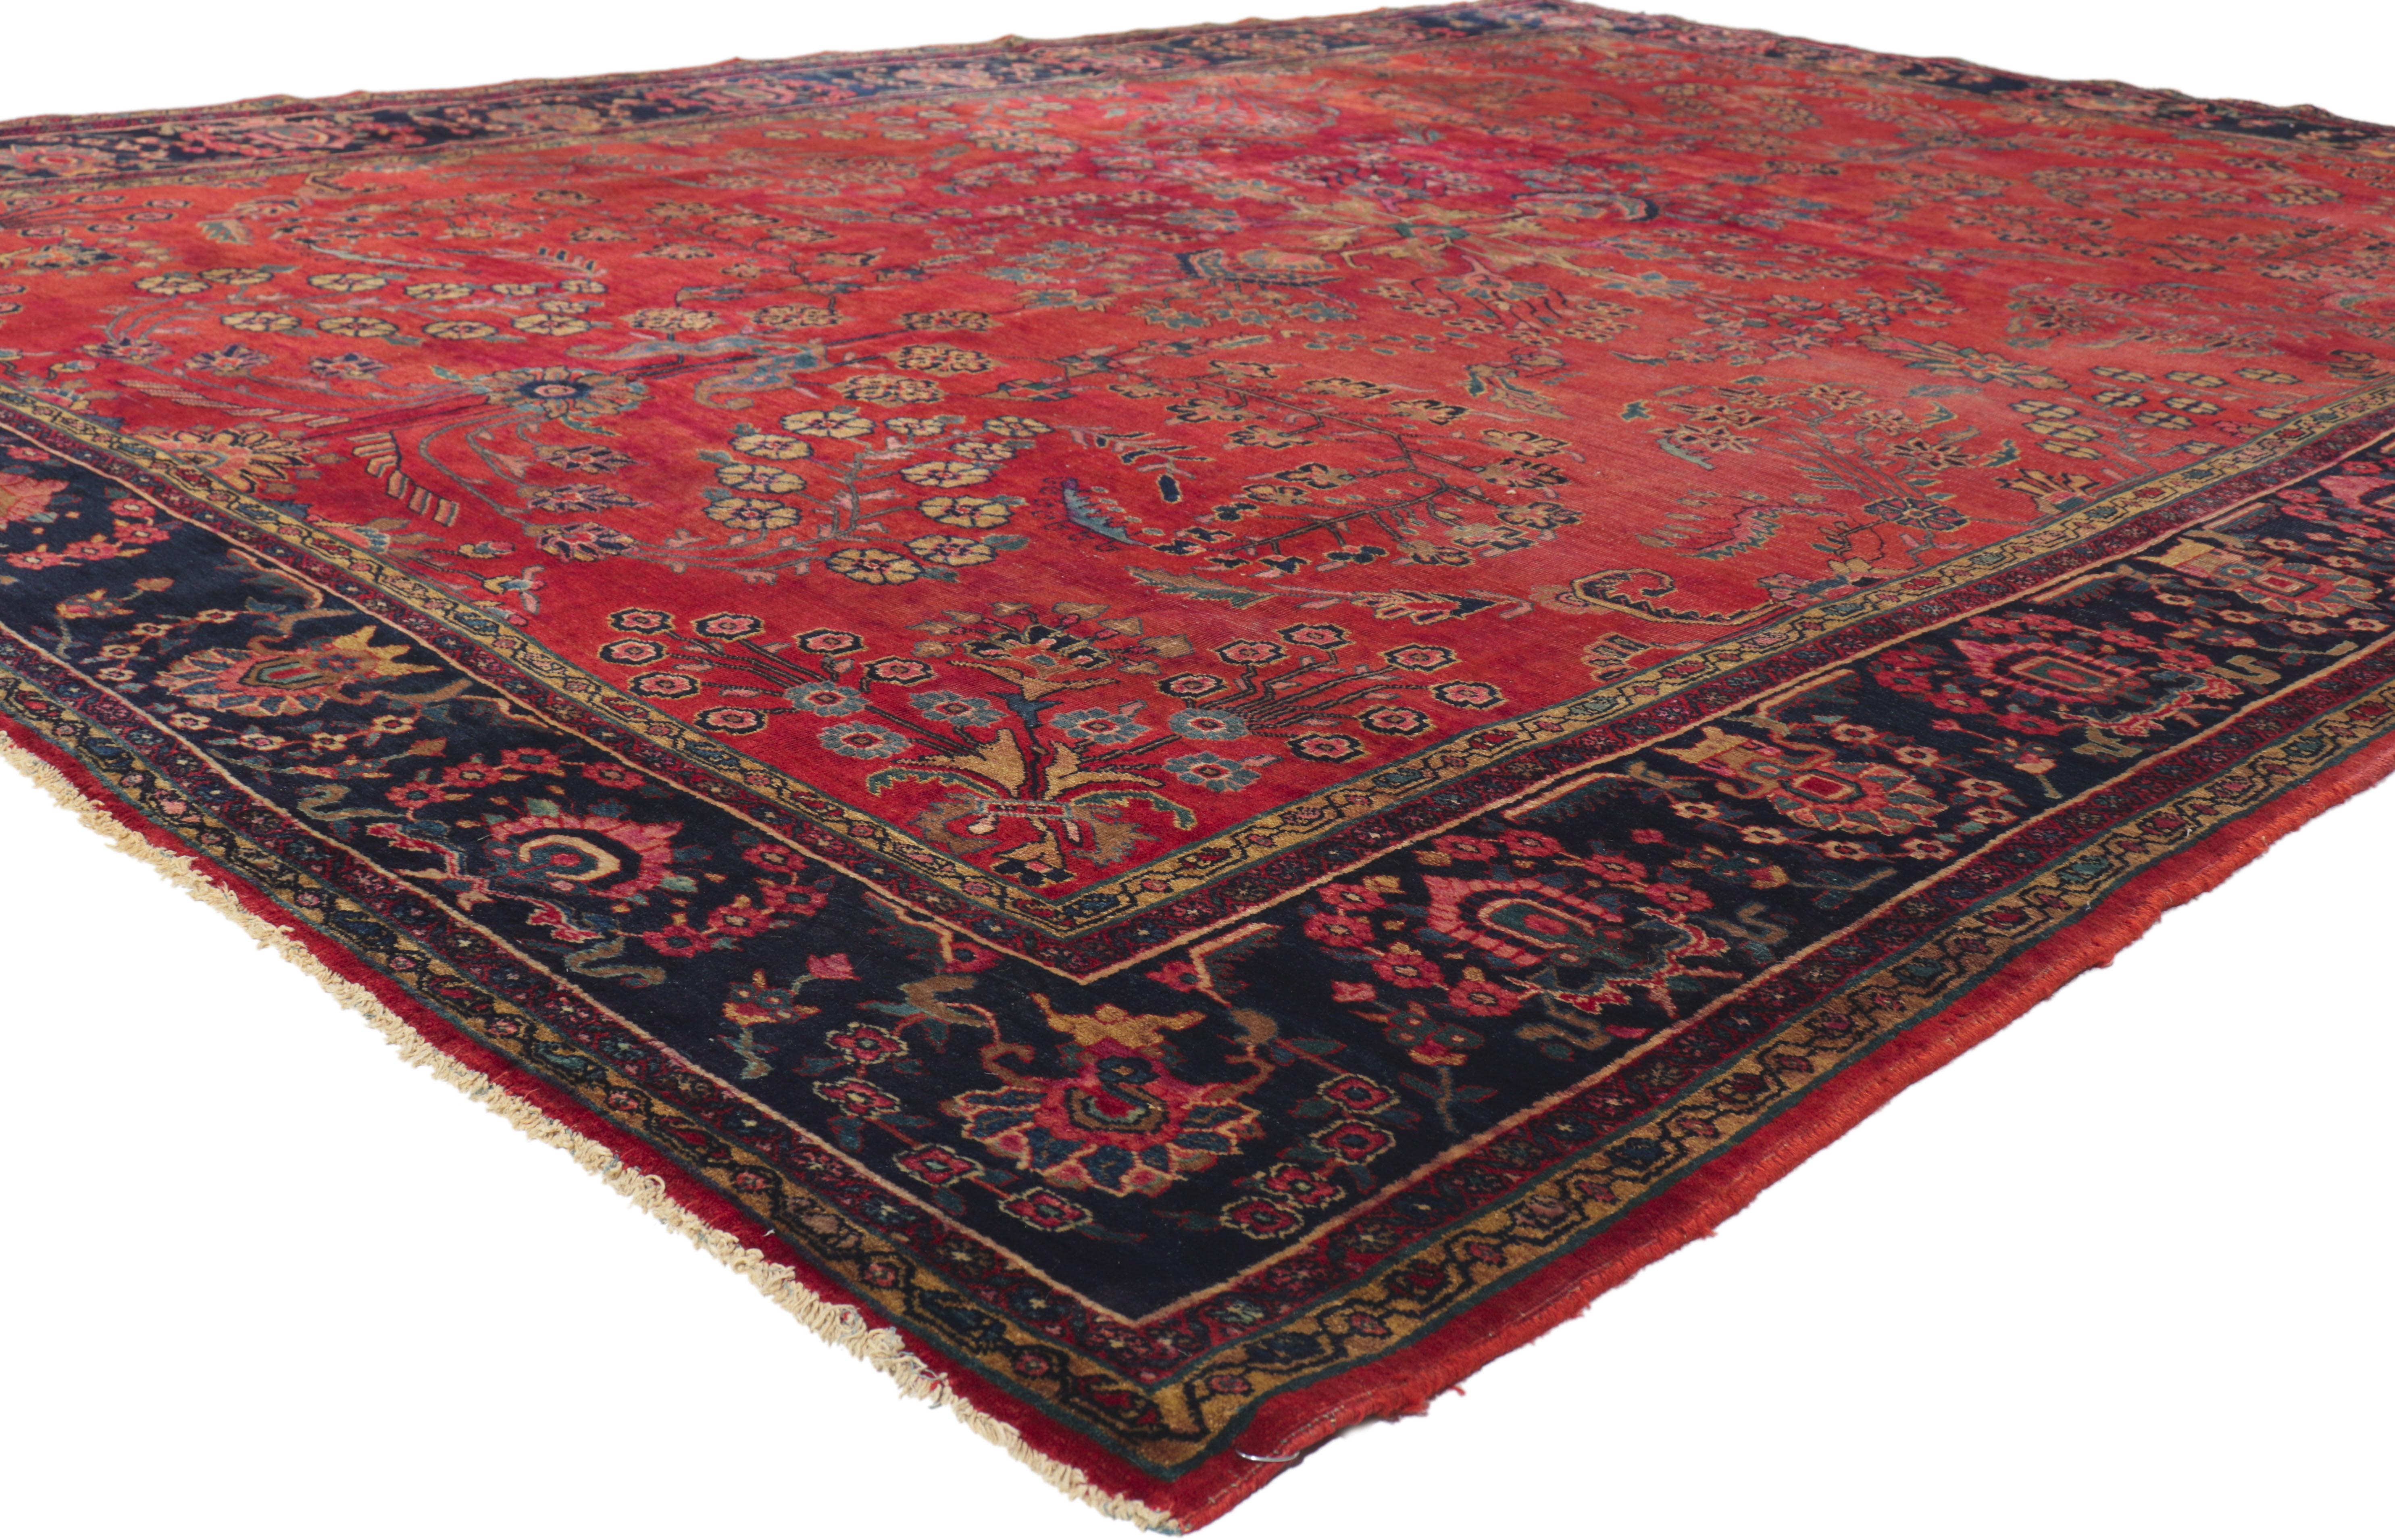 78460 Antique Red Persian Sarouk Rug, 08'08 x 12'03.
Rich in color with beguiling decadence, this hand knotted wool antique Persian Sarouk rug is a captivating vision of woven beauty. The elaborate floral design and sophisticated color palette woven